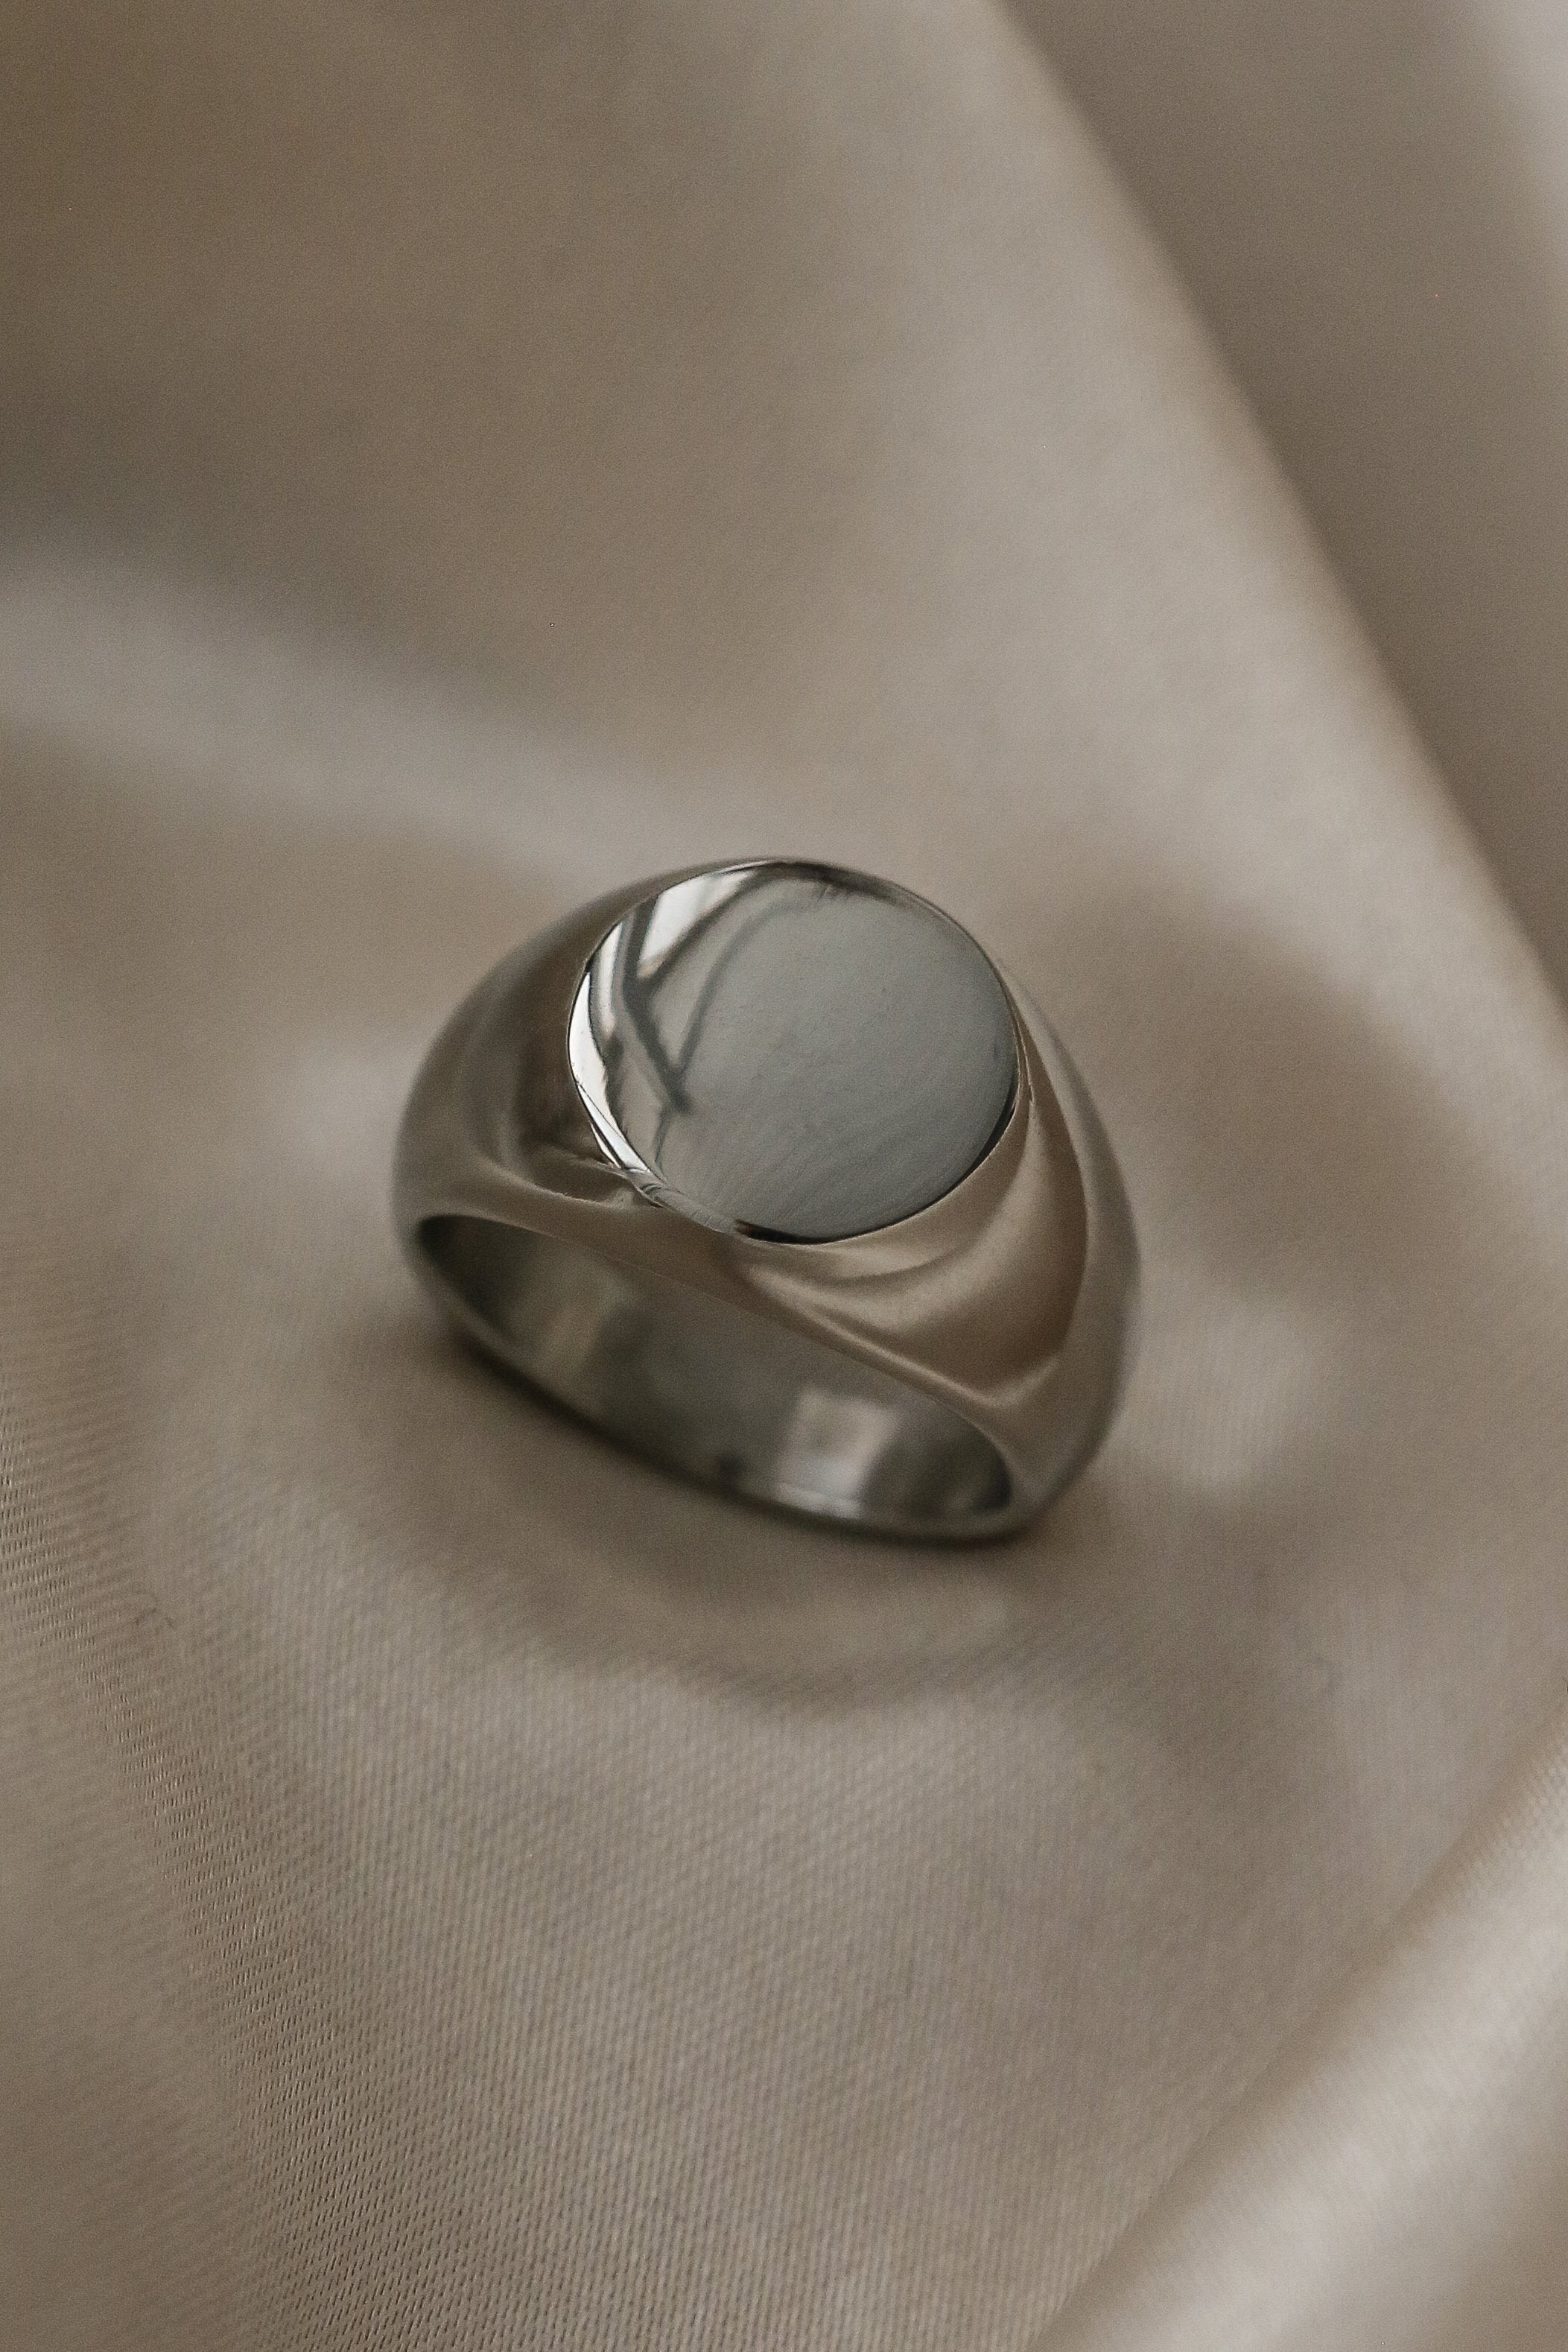 Cameron Man Ring - Boutique Minimaliste has waterproof, durable, elegant and vintage inspired jewelry